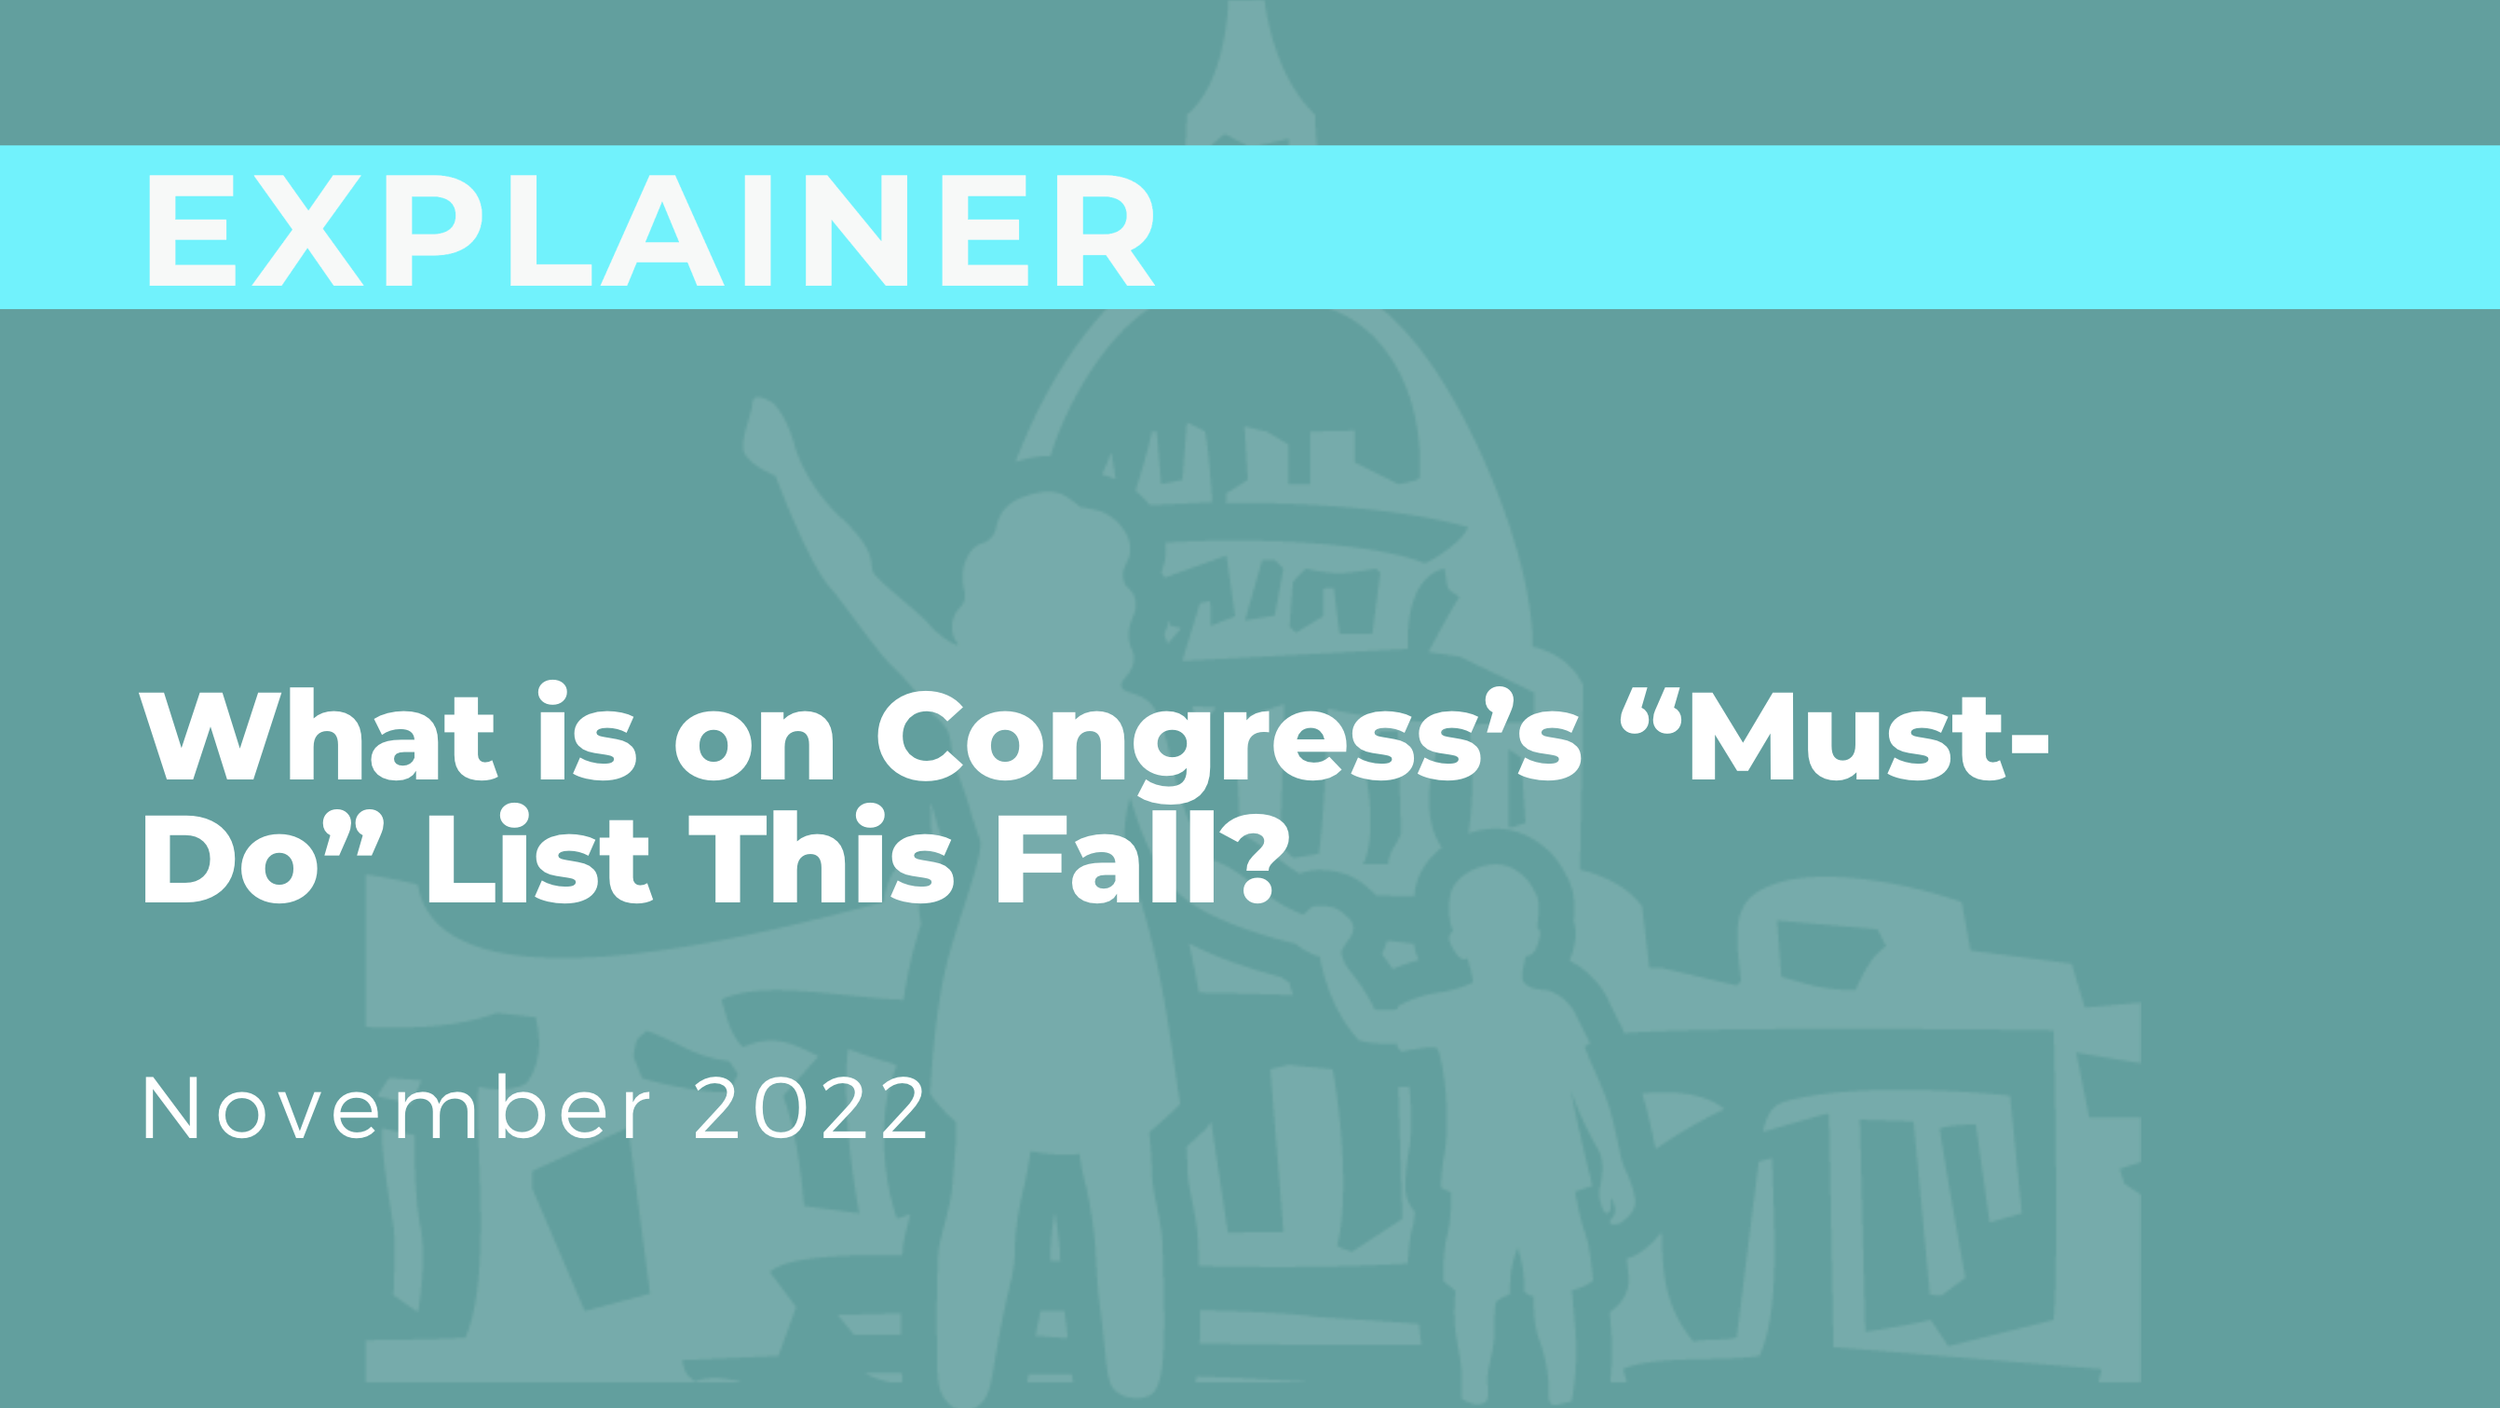 What Is On Congress's "Must-Do" List This Fall?